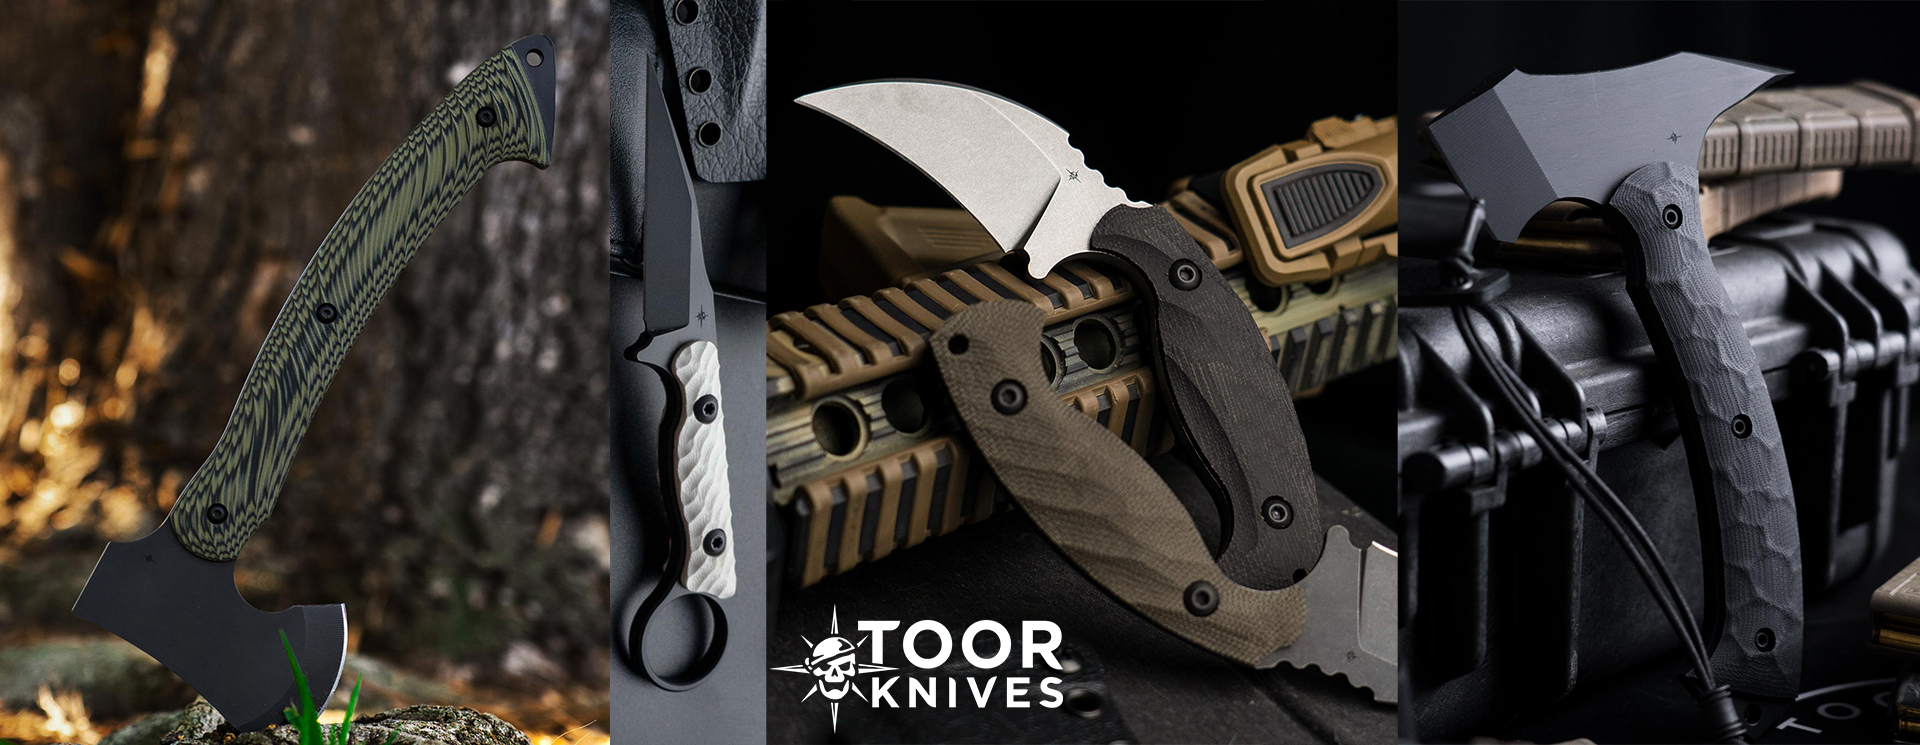 NEW ARRIVALS FROM TOOR KNIVES